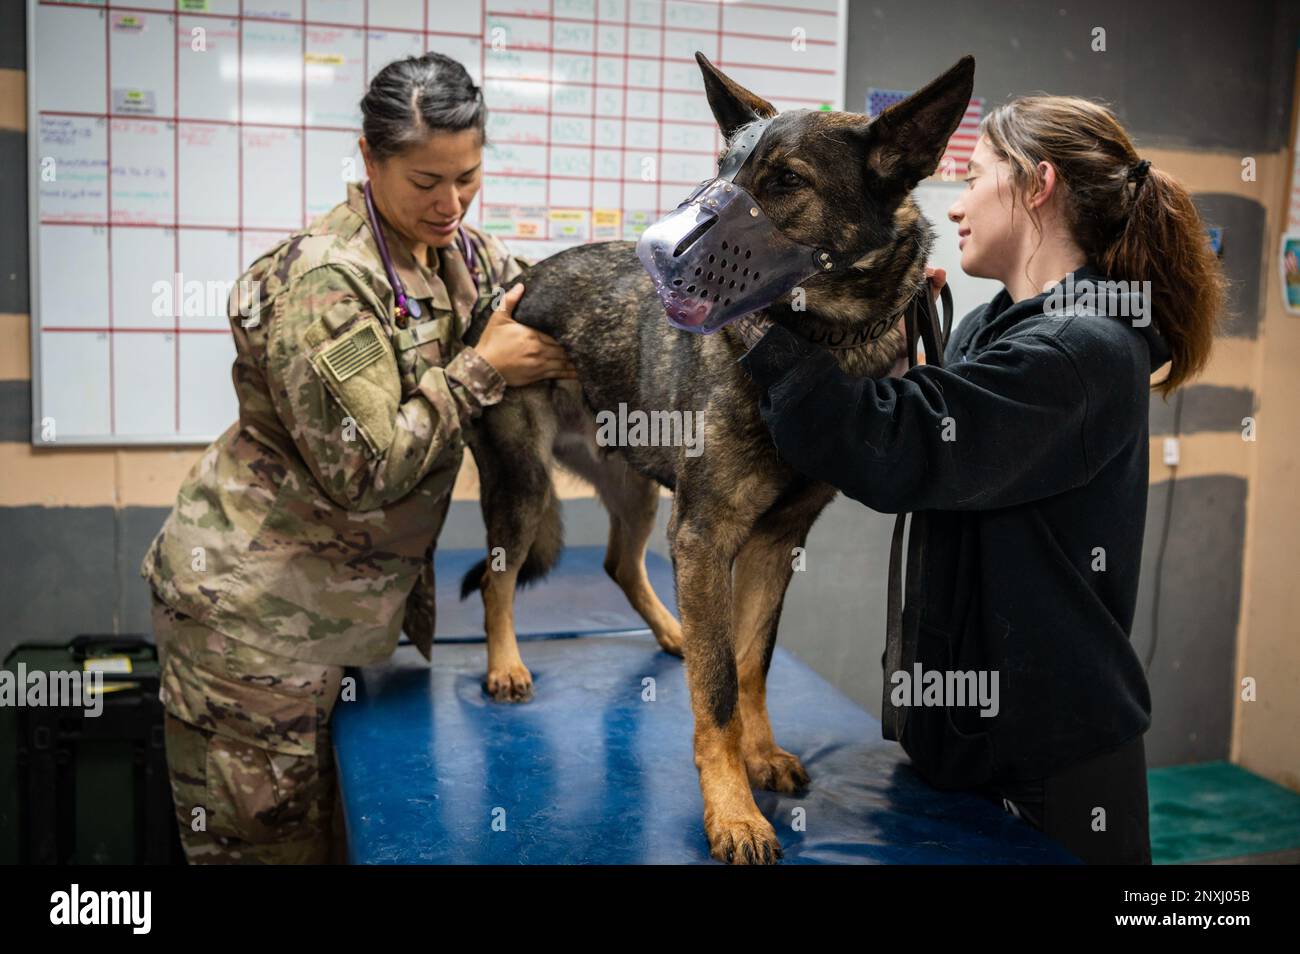 U.S. Army Capt. Leilani Im, a 109th Medical Detachment Veterinary Services veterinarian, performs a health certification on Noryk, 226th Military Police Detachment (Military Working Dog), at Ali Al Salem Air Base, Kuwait, Jan. 17, 2023. AASAB is a hub for sending MWDs in and out of United States Central Command’s area of responsibility, and they need to be medically cleared before leaving for their missions. Veterinary Services is responsible for providing health certifications and exams for all MWDs passing in and out of Kuwait. Stock Photo